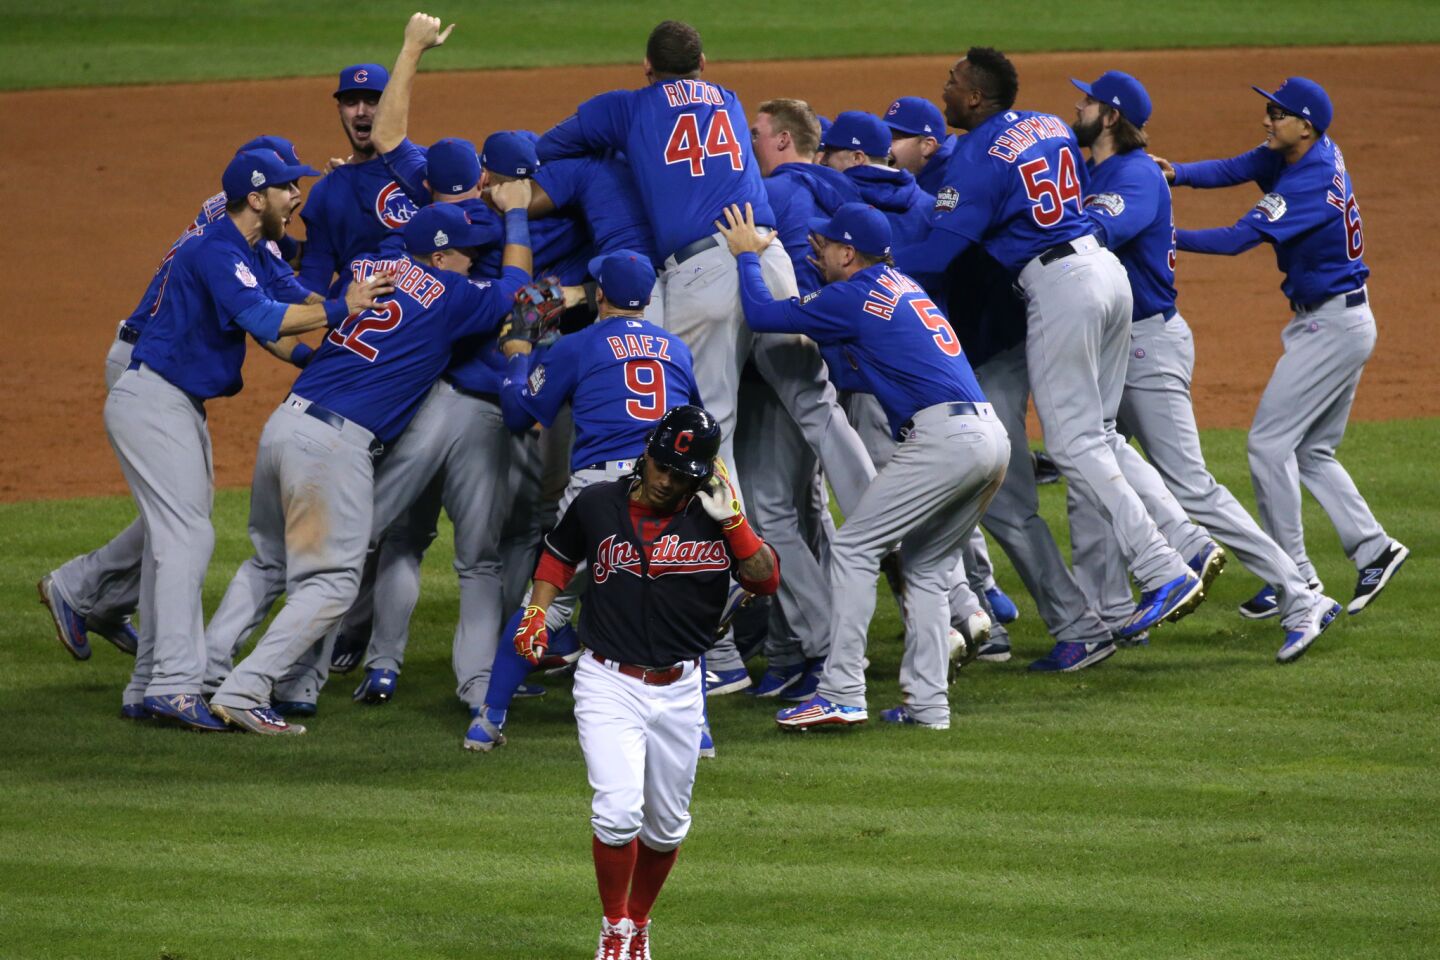 Cubs win the World Series